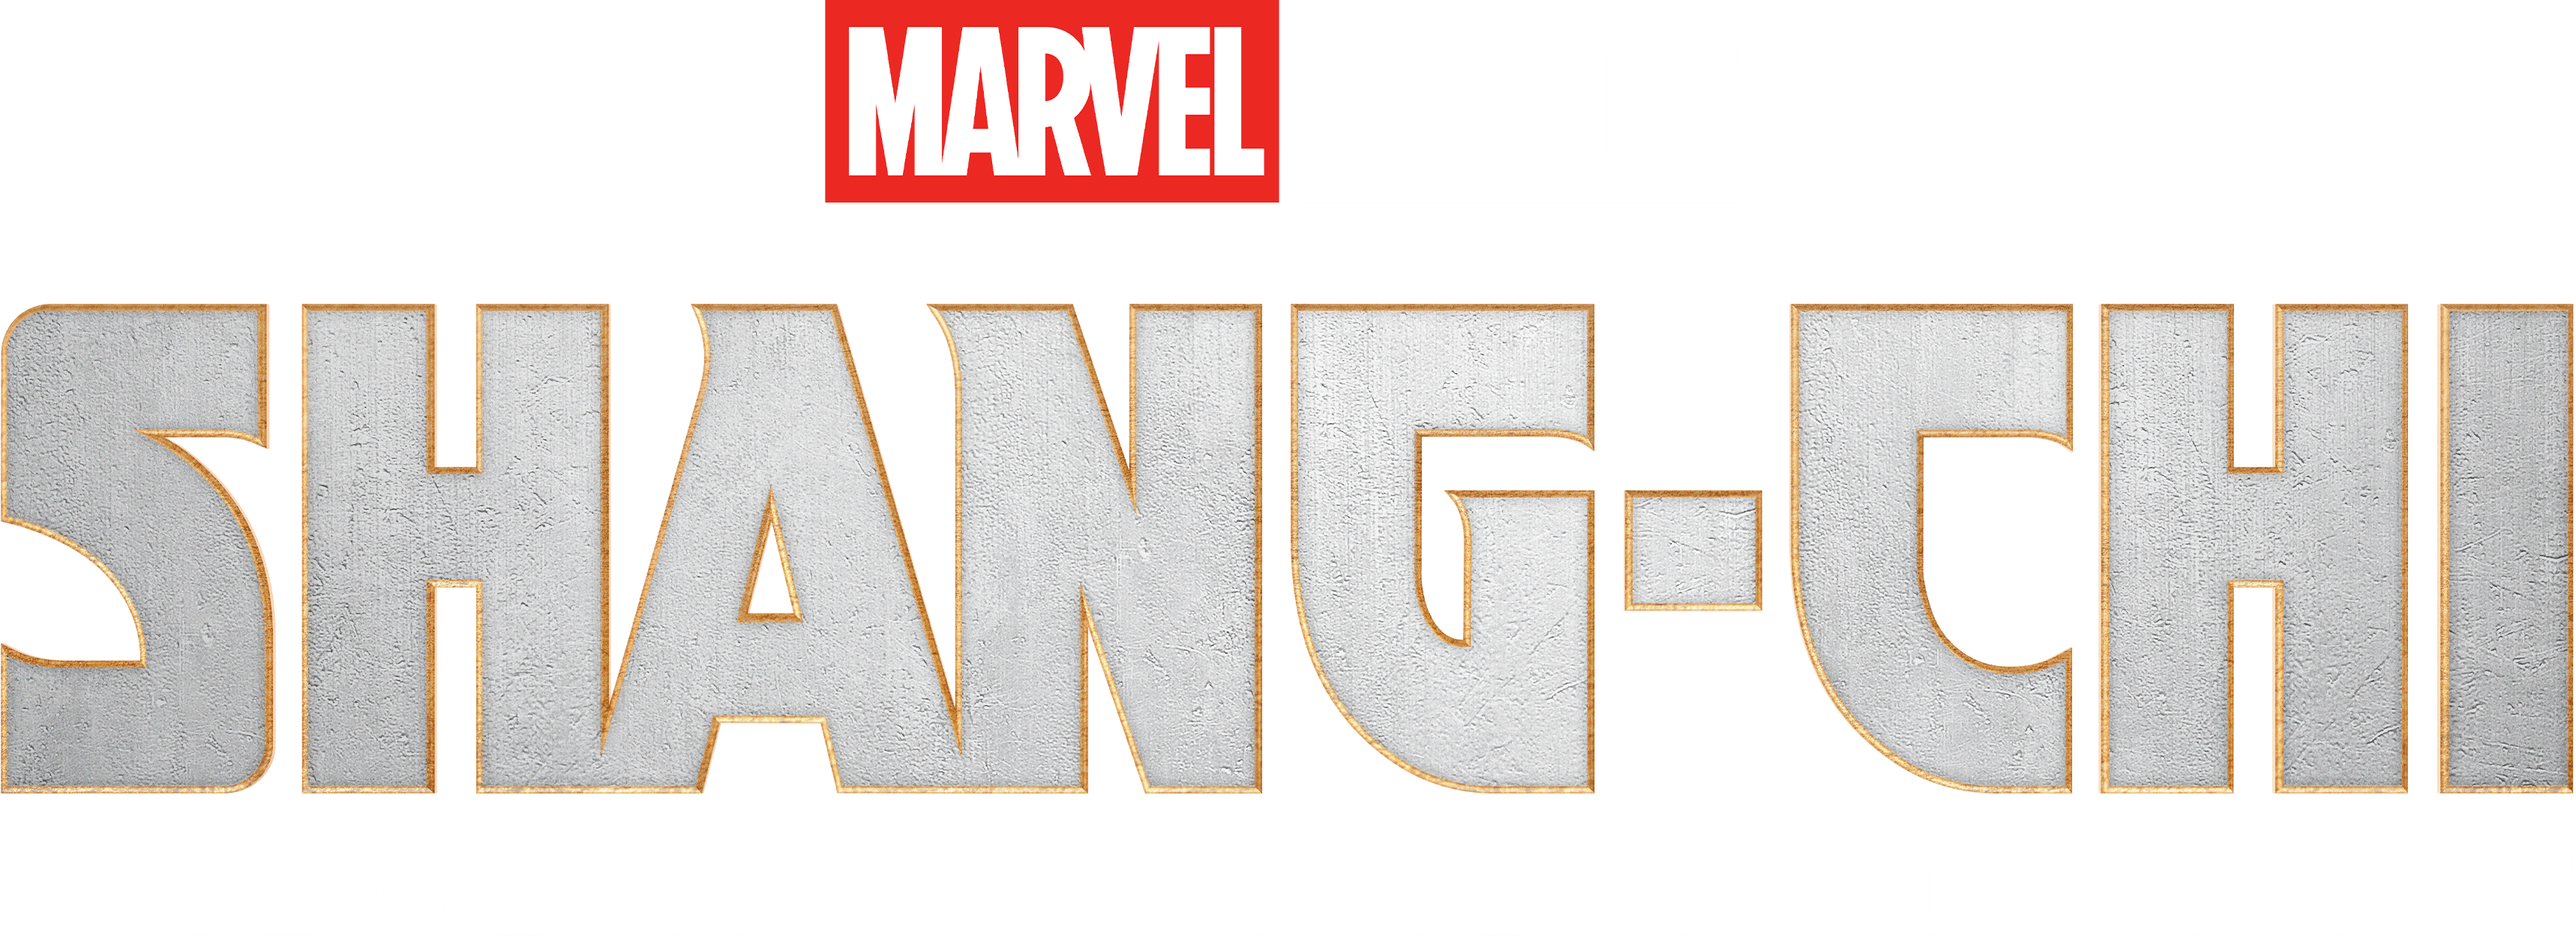 Shang-Chi and the Legend of the Ten Rings logo